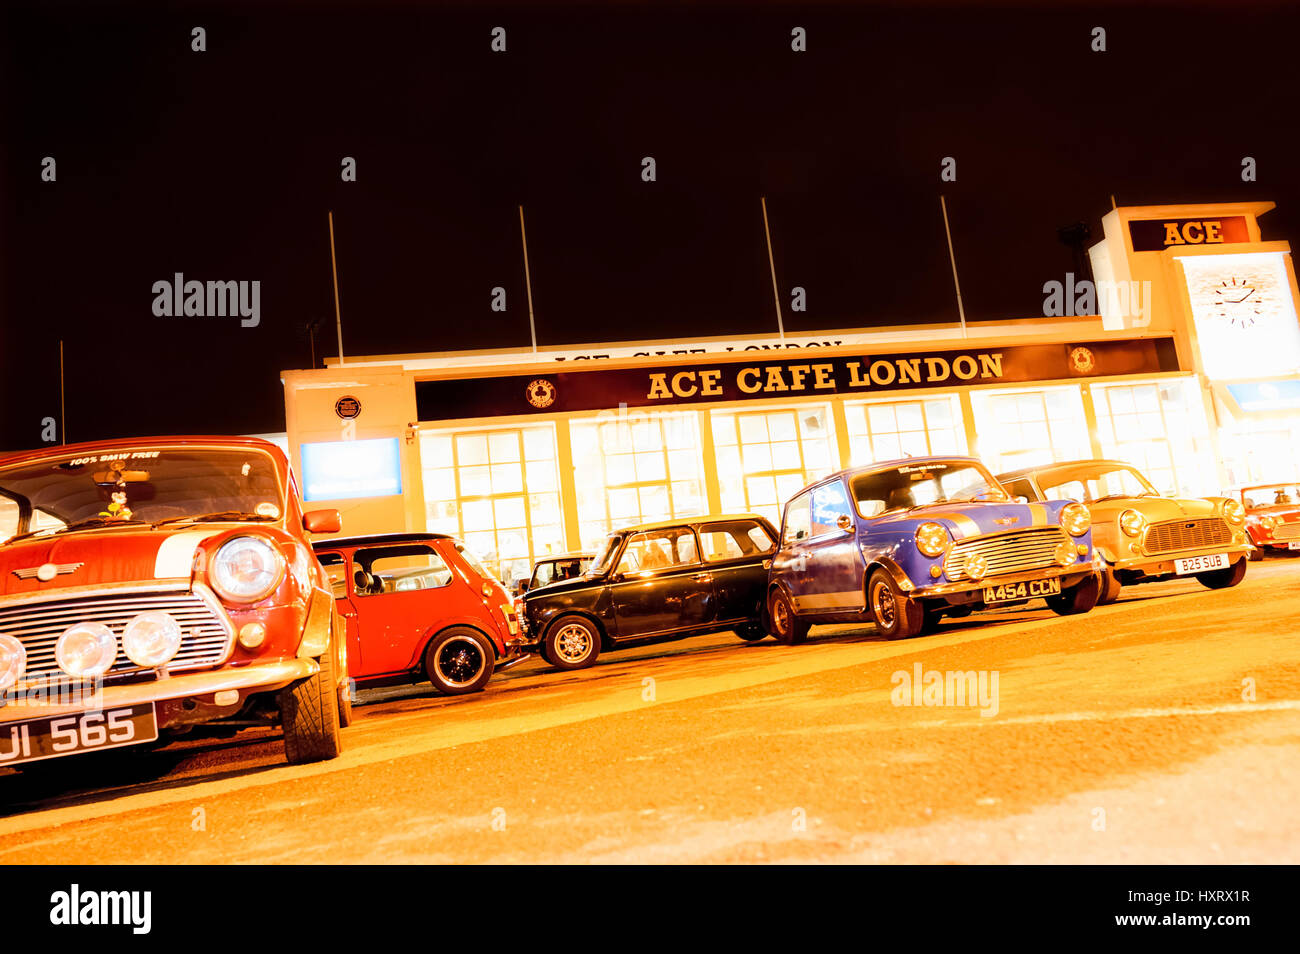 London, UK - April 4, 2013: Night exposure of a classic Austin Mini automobiles parked at the landmark Ace Cafe in London, UK Stock Photo